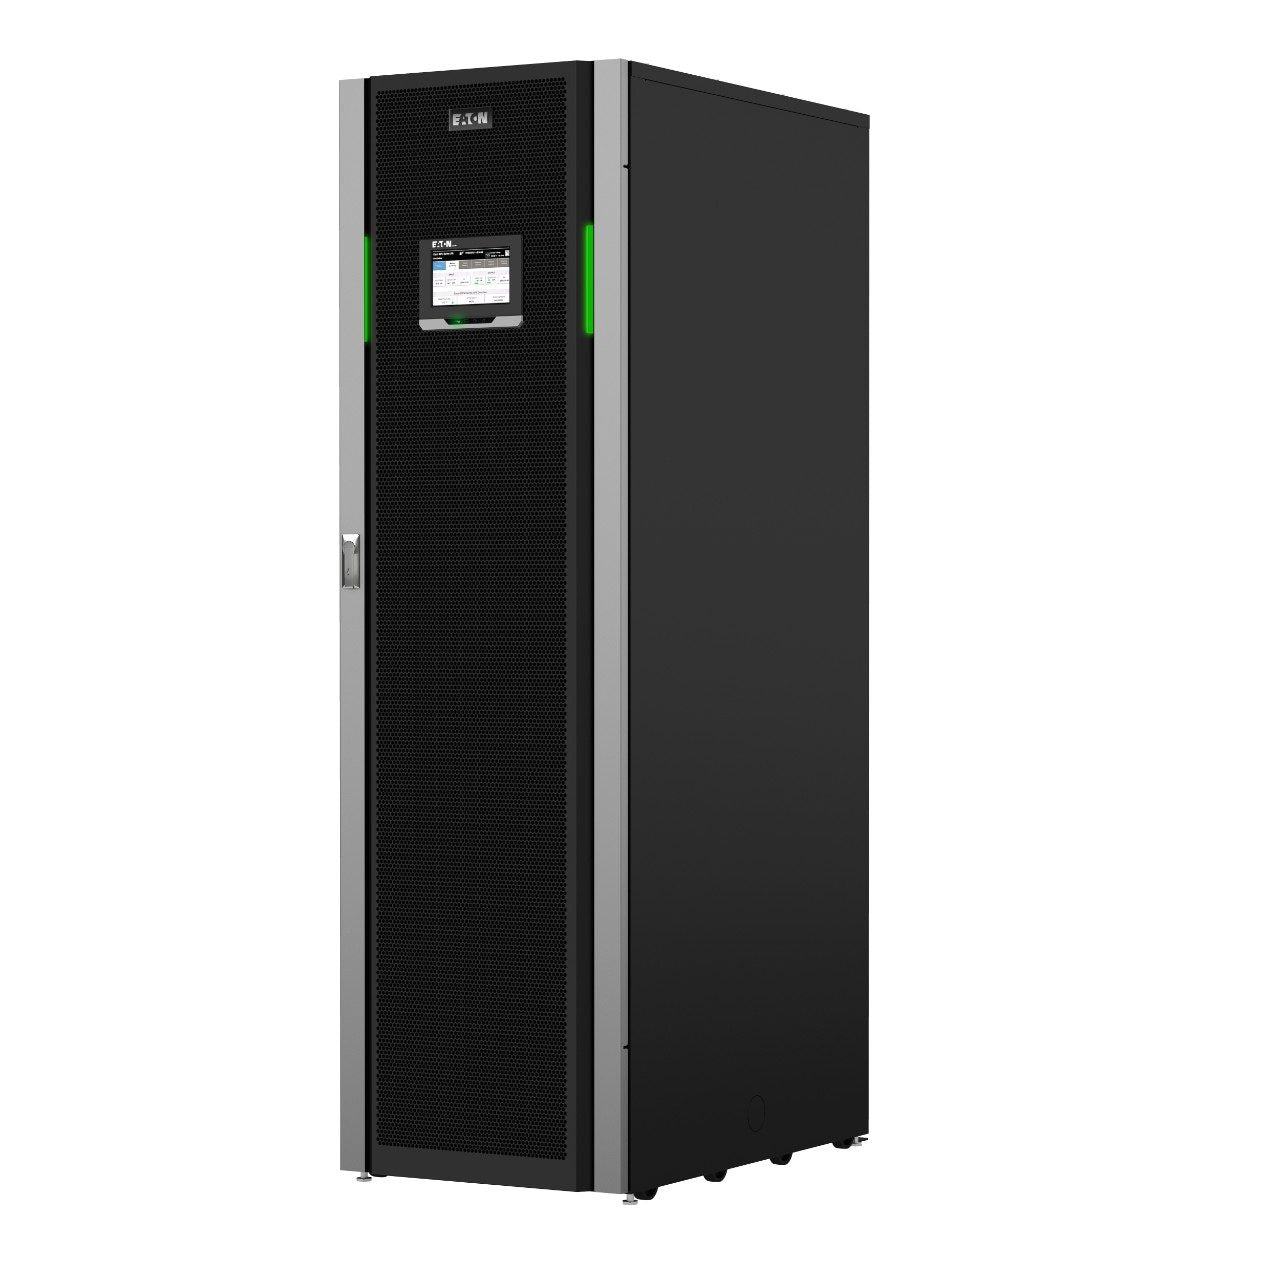 93PM 80KW Upgradable to 100KW  93PM80-100